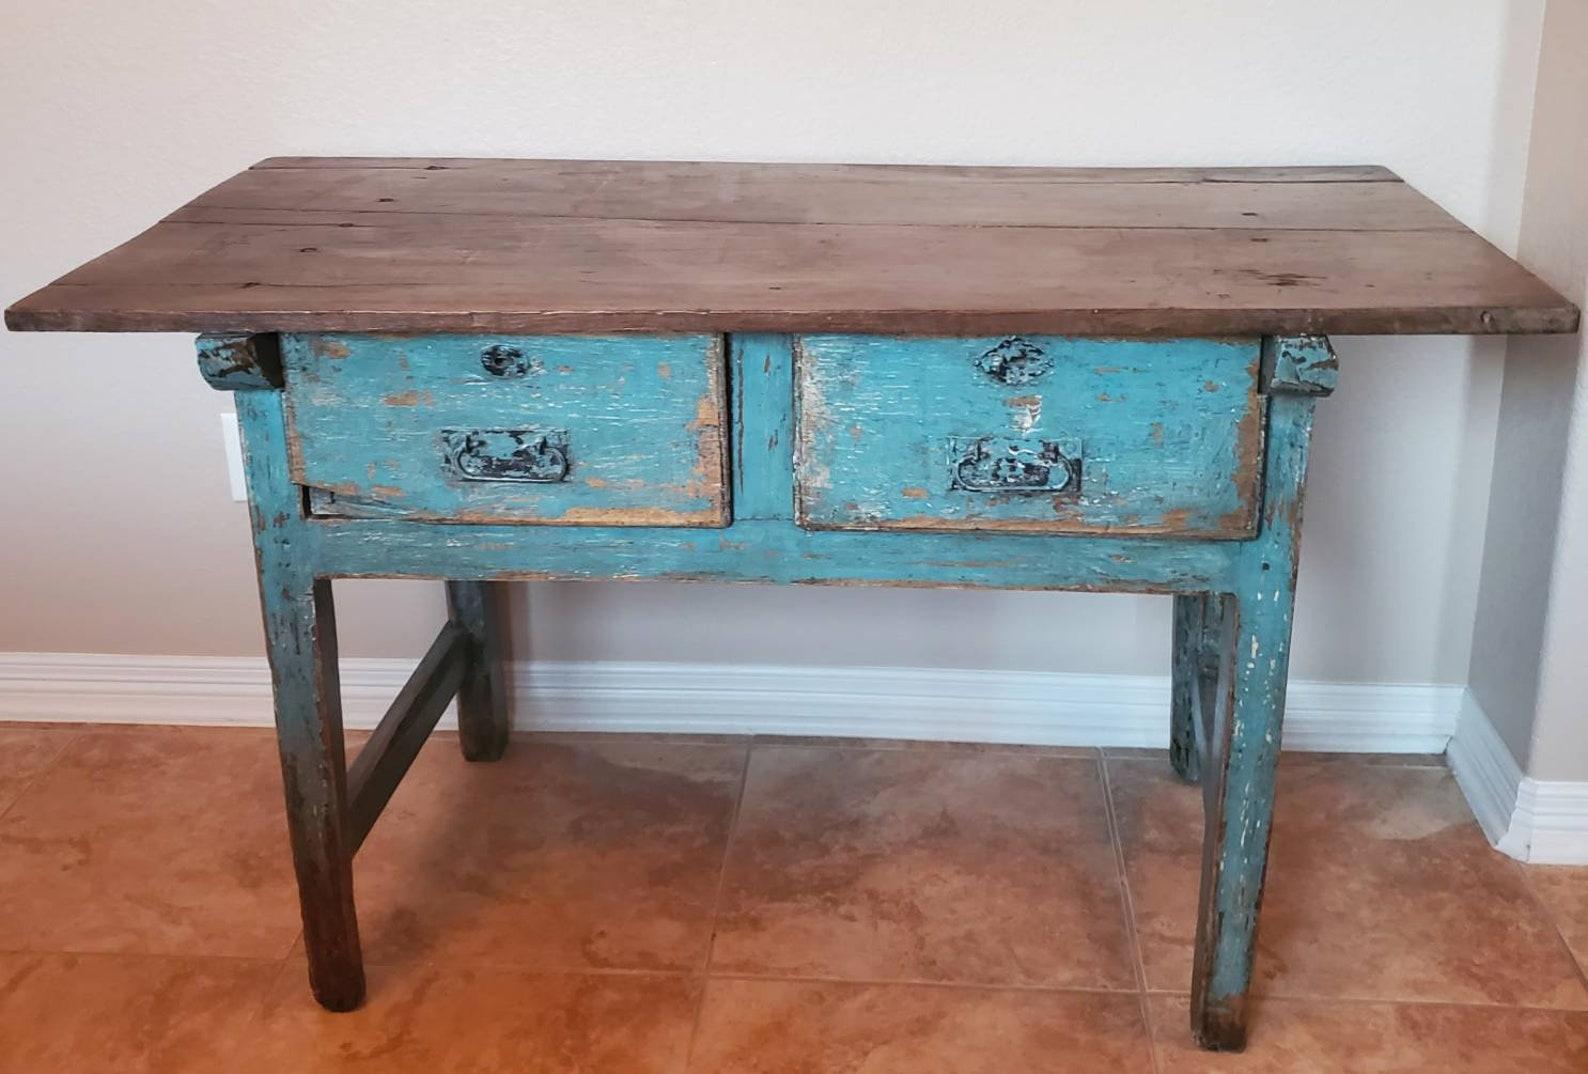 Patina perfection!! A rustic 19th century hand-crafted Spanish work table, in a distressed, weathered painted finish. Having a rectangular two board wooden plank top with beautiful, rich patina, over solid pine case fitted with two large hand carved